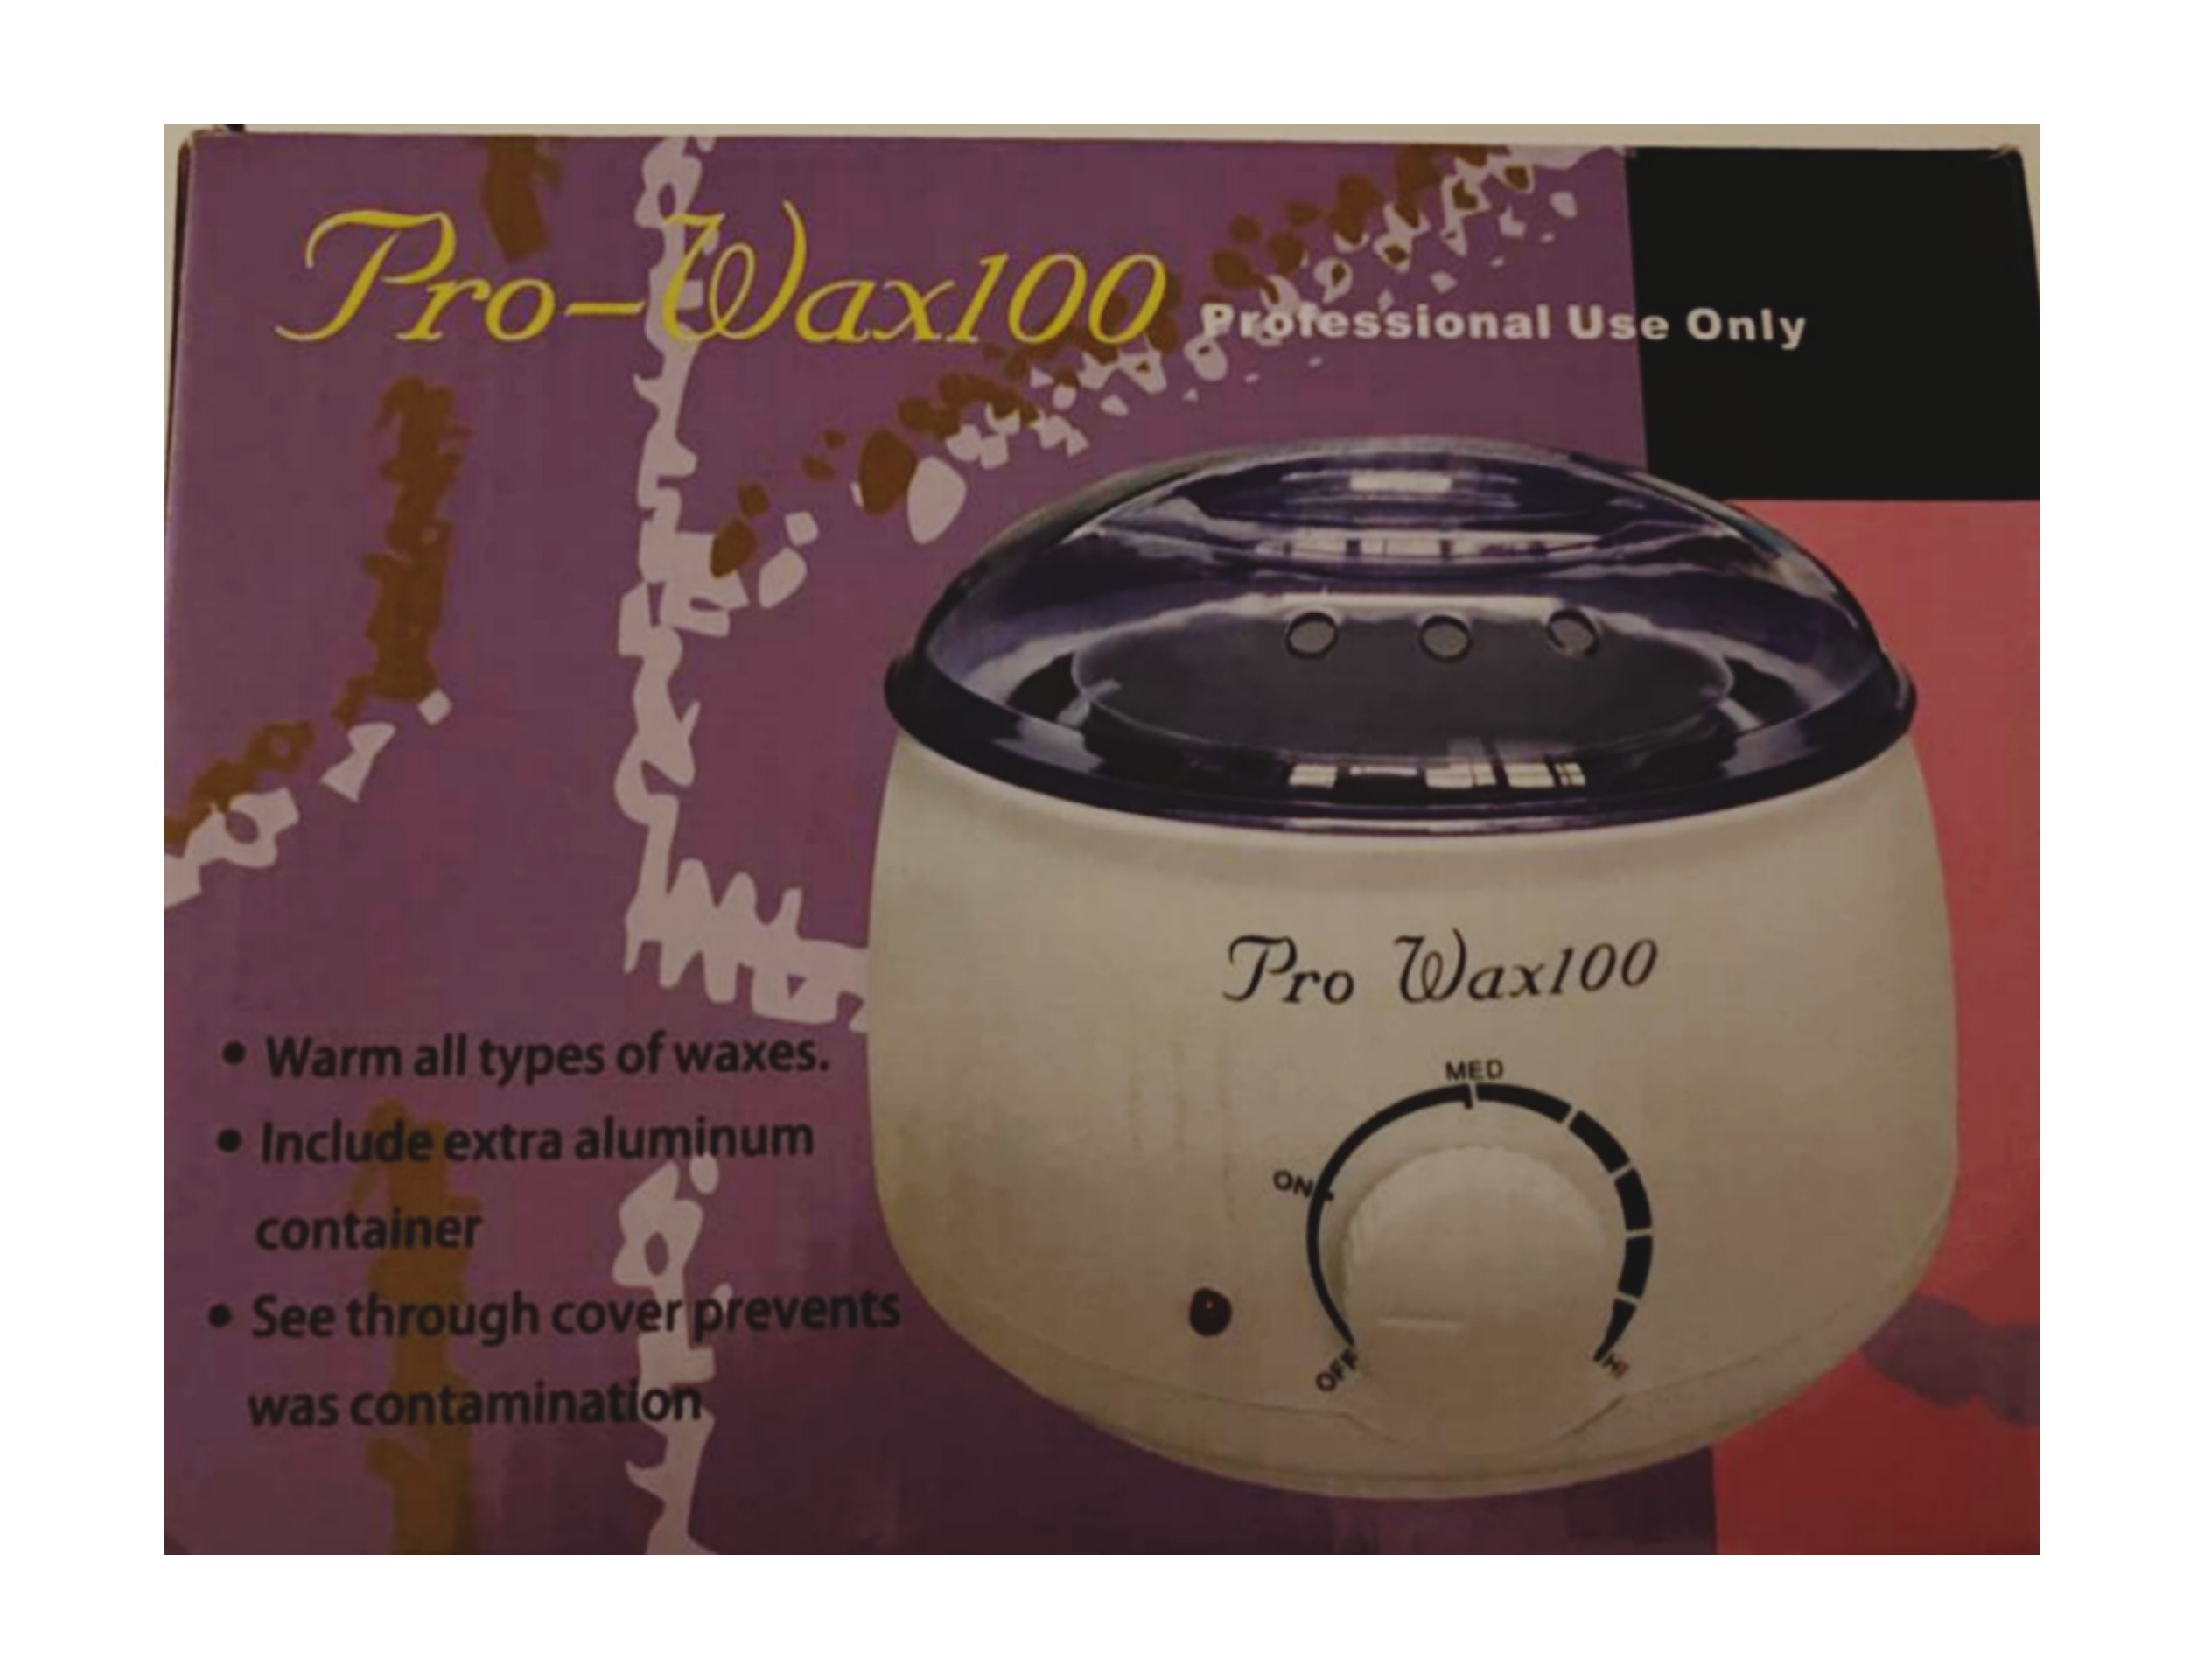 Pro-Wax 100x Fashion&Skin Care Hair Removal Wax without Strip